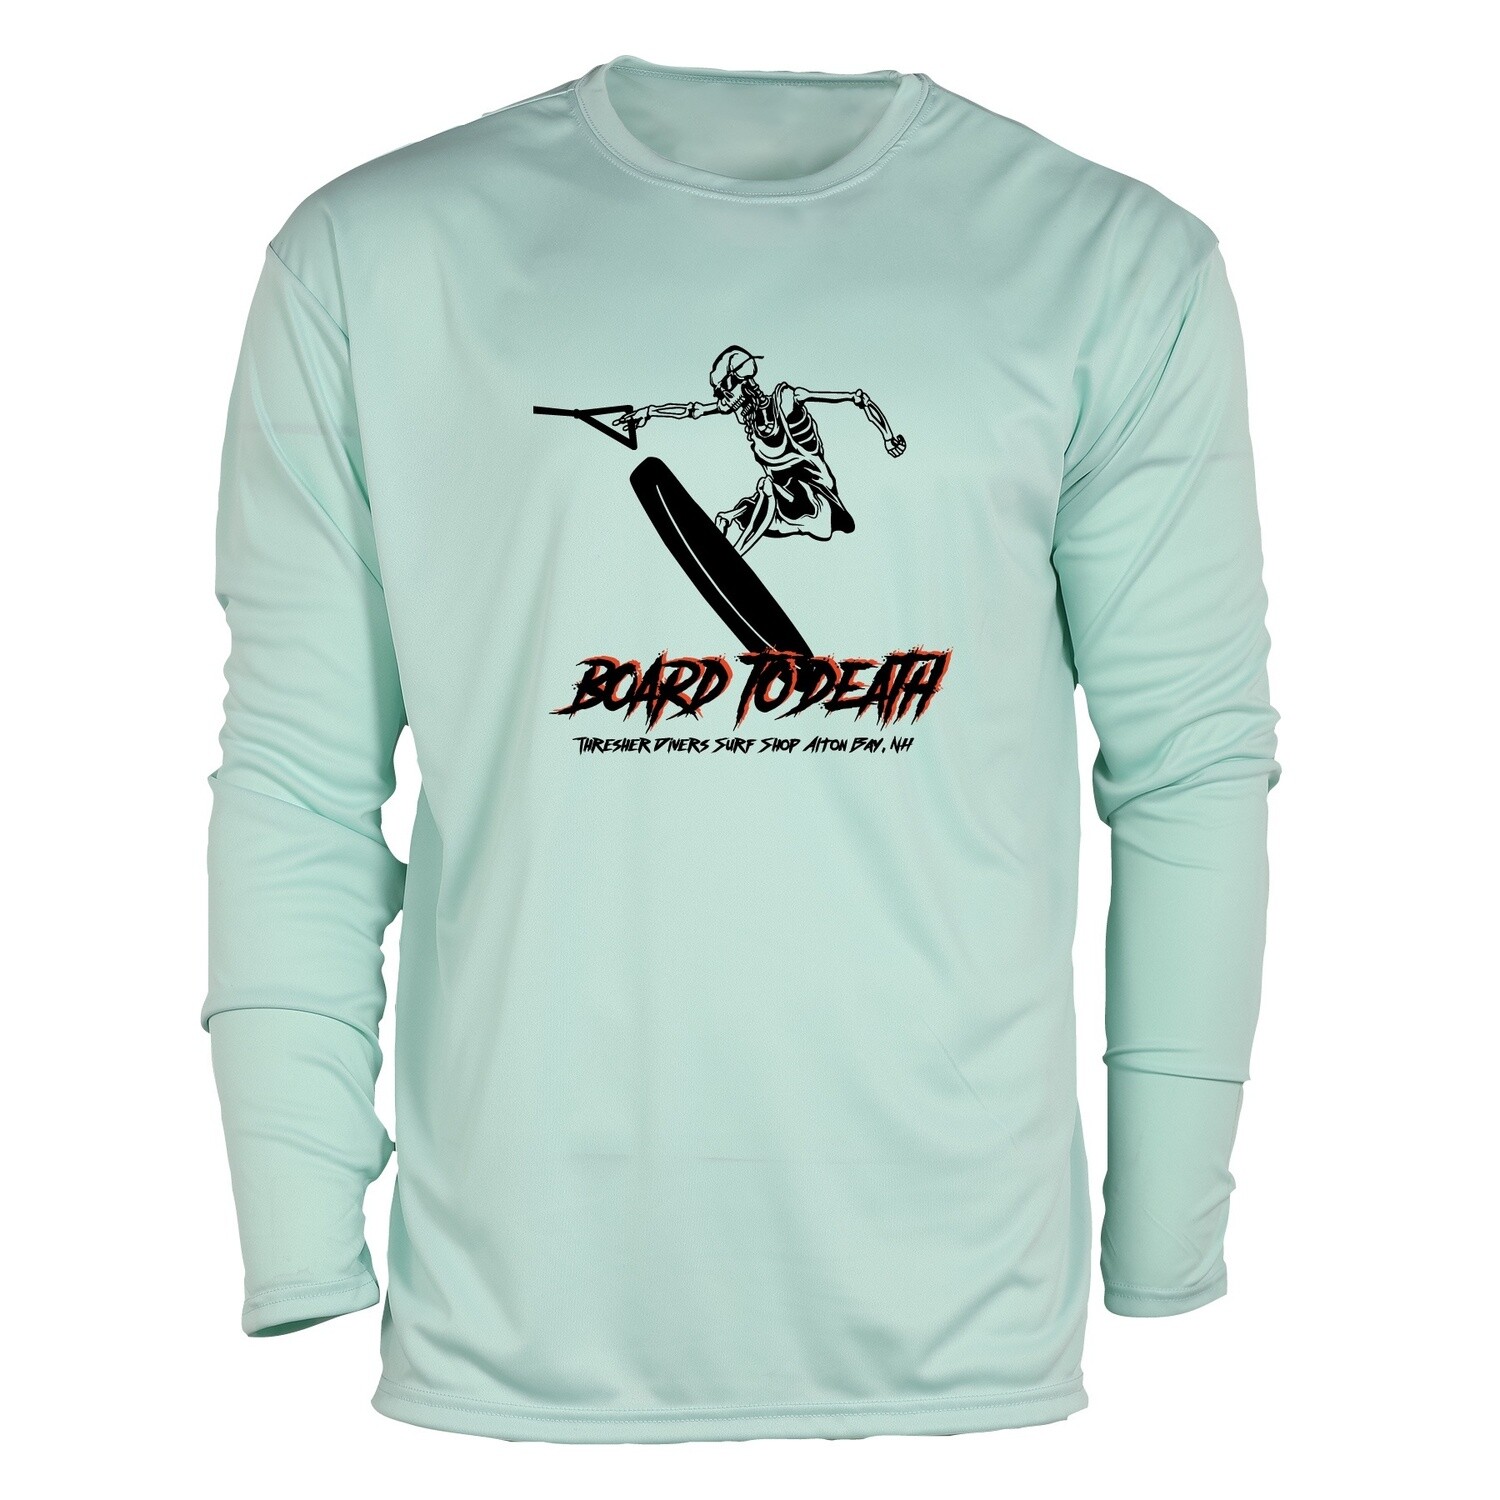 Long Sleeve Performance Shirt, Size: SM, Colour: Pastel Mint, Design: Board to Death